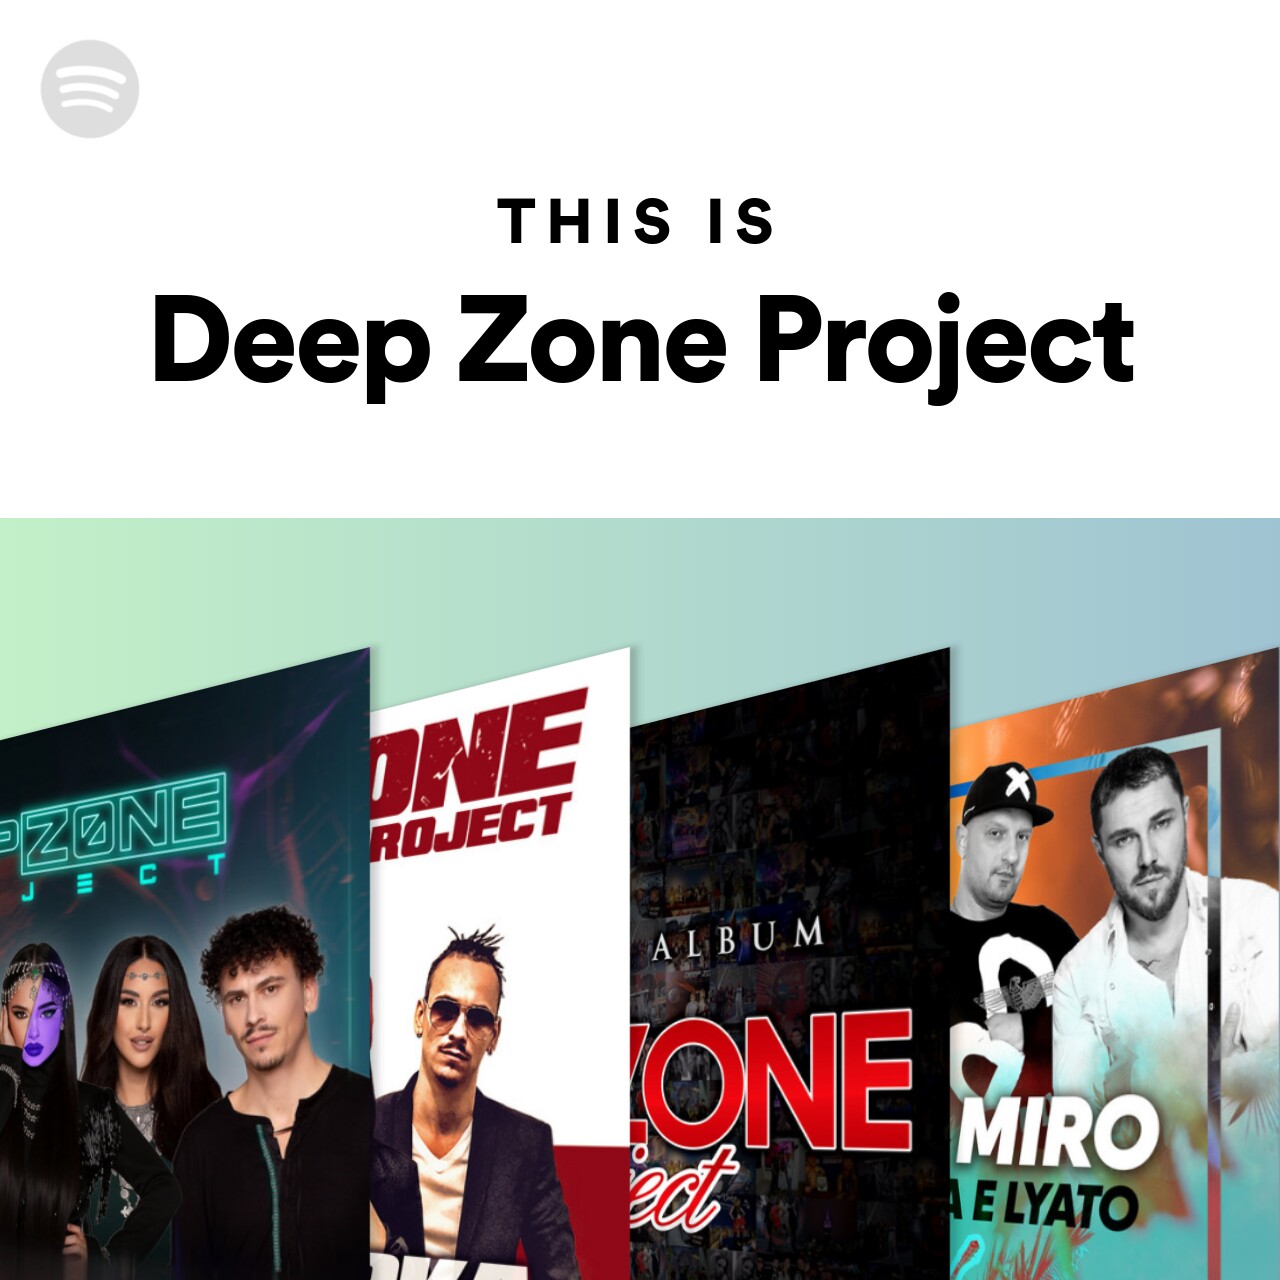 This Is Deep Zone Project